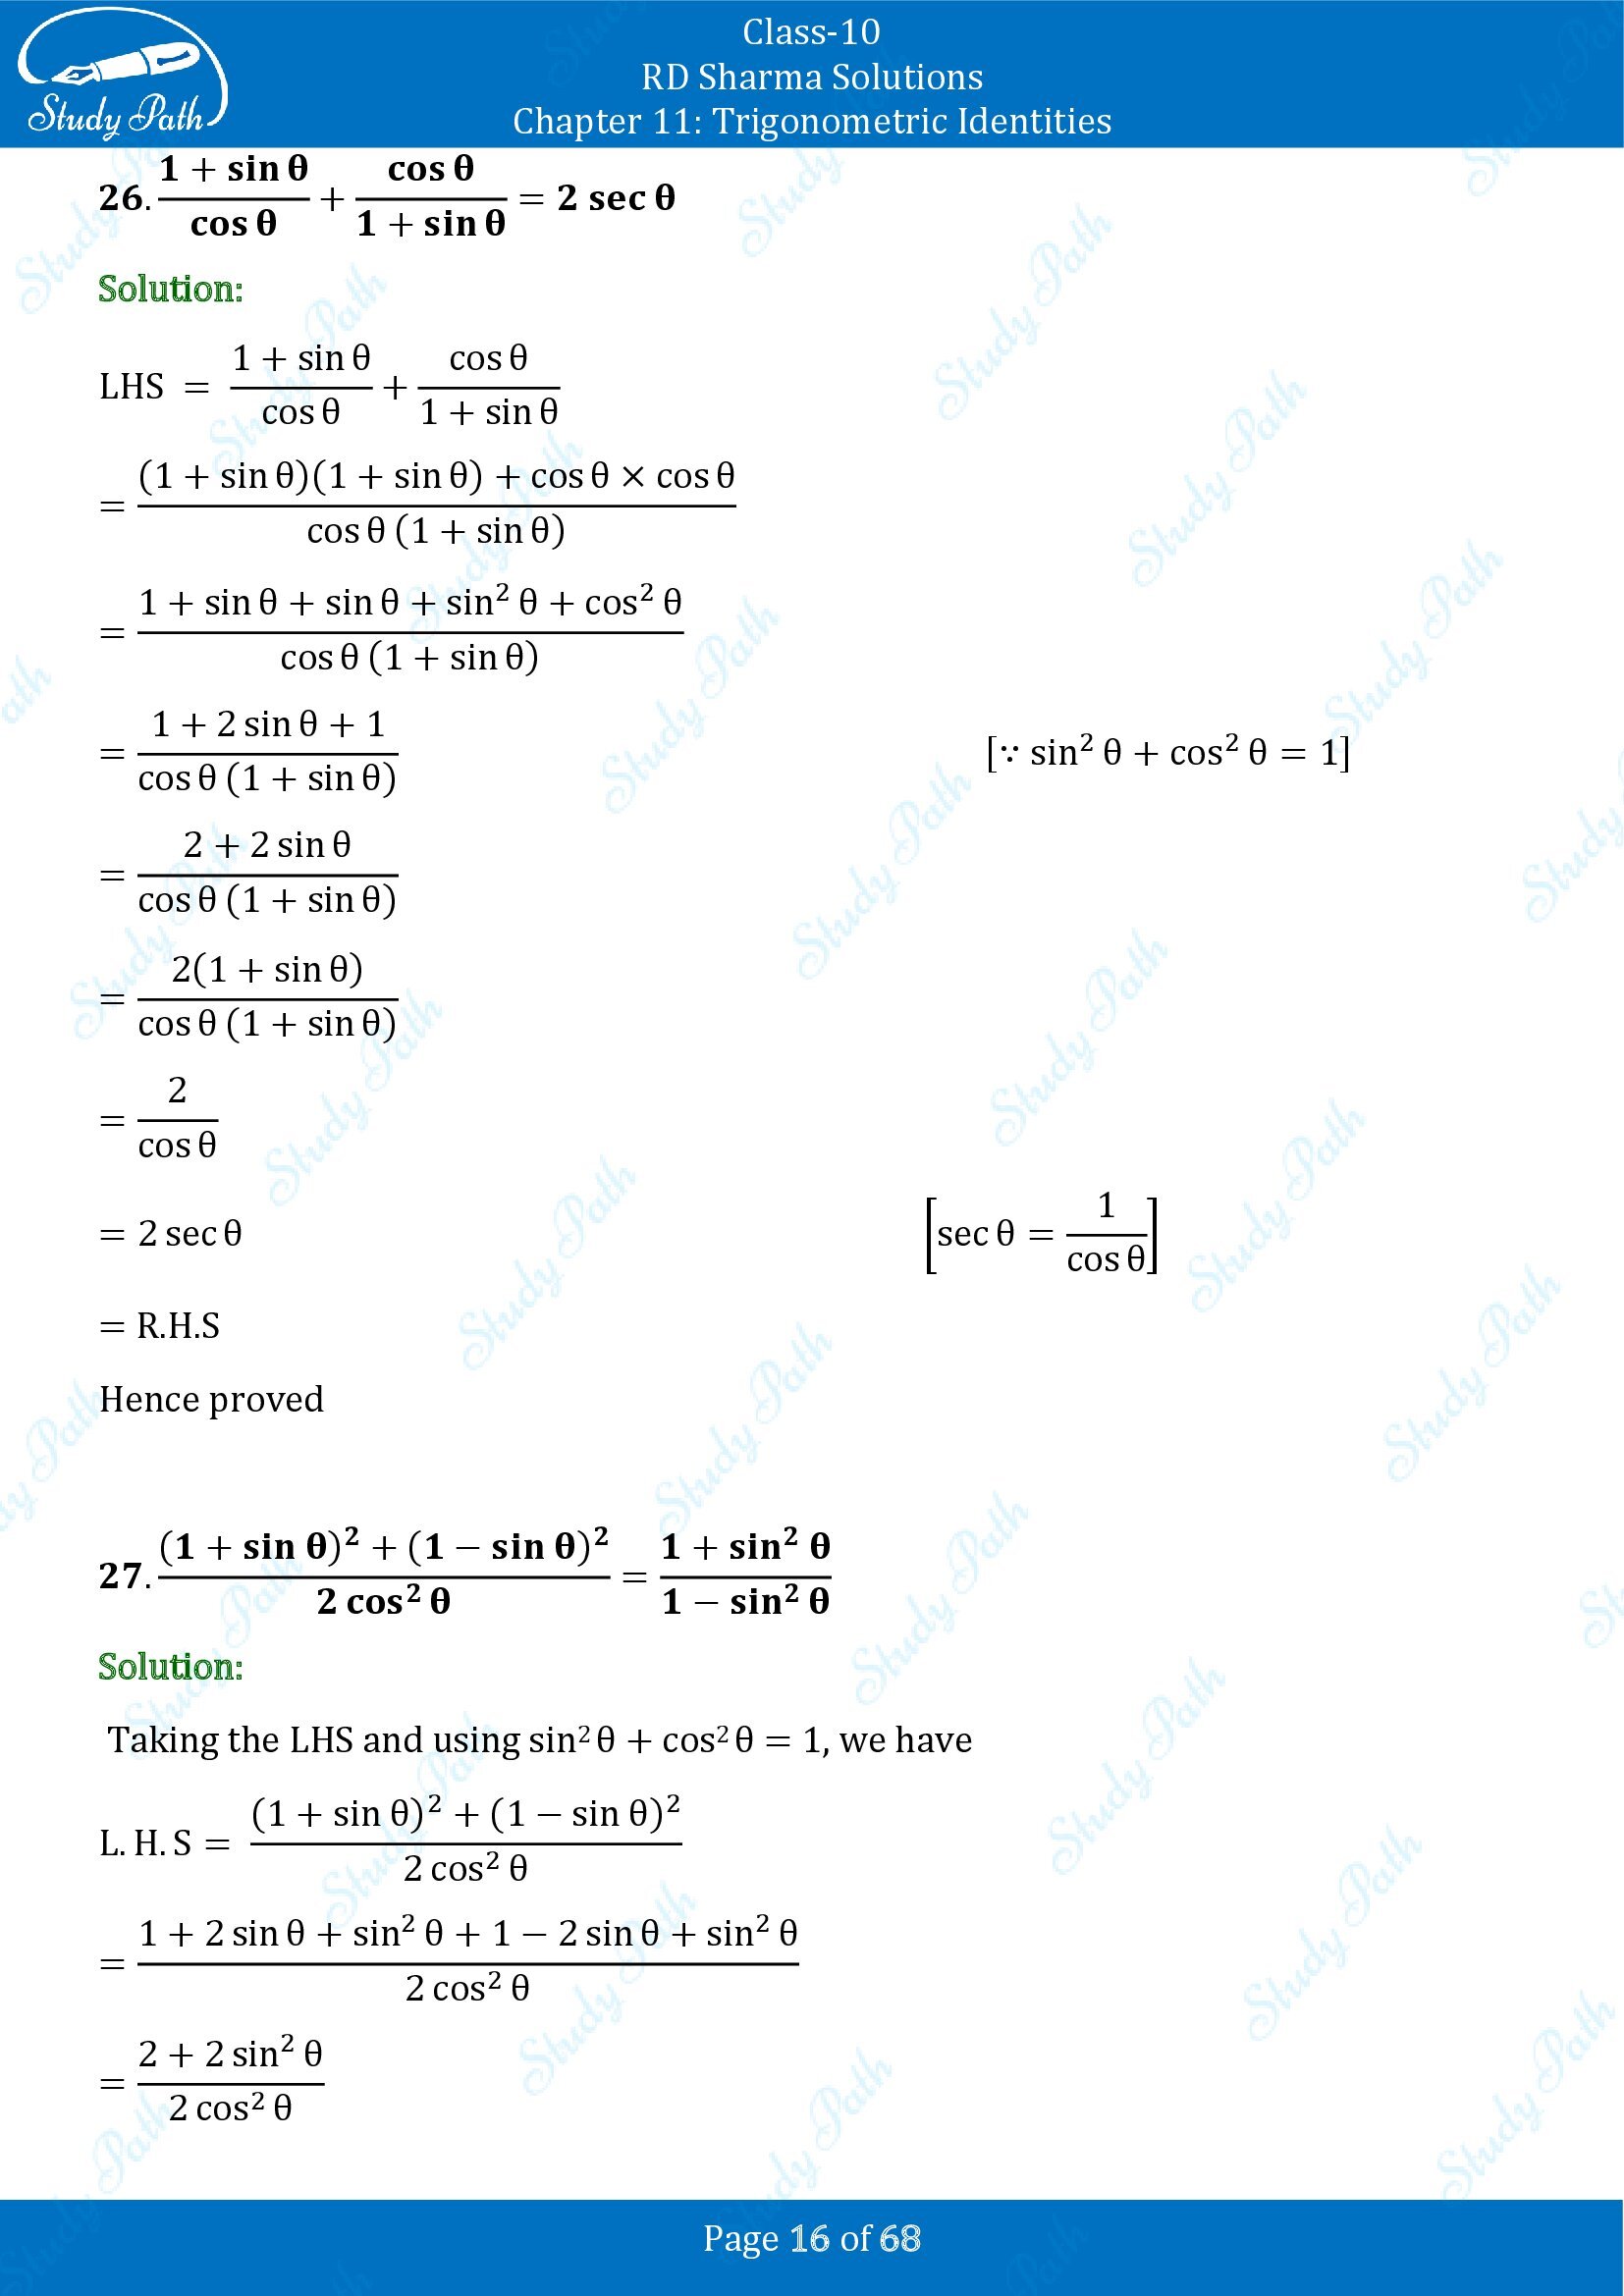 RD Sharma Solutions Class 10 Chapter 11 Trigonometric Identities Exercise 11.1 00016